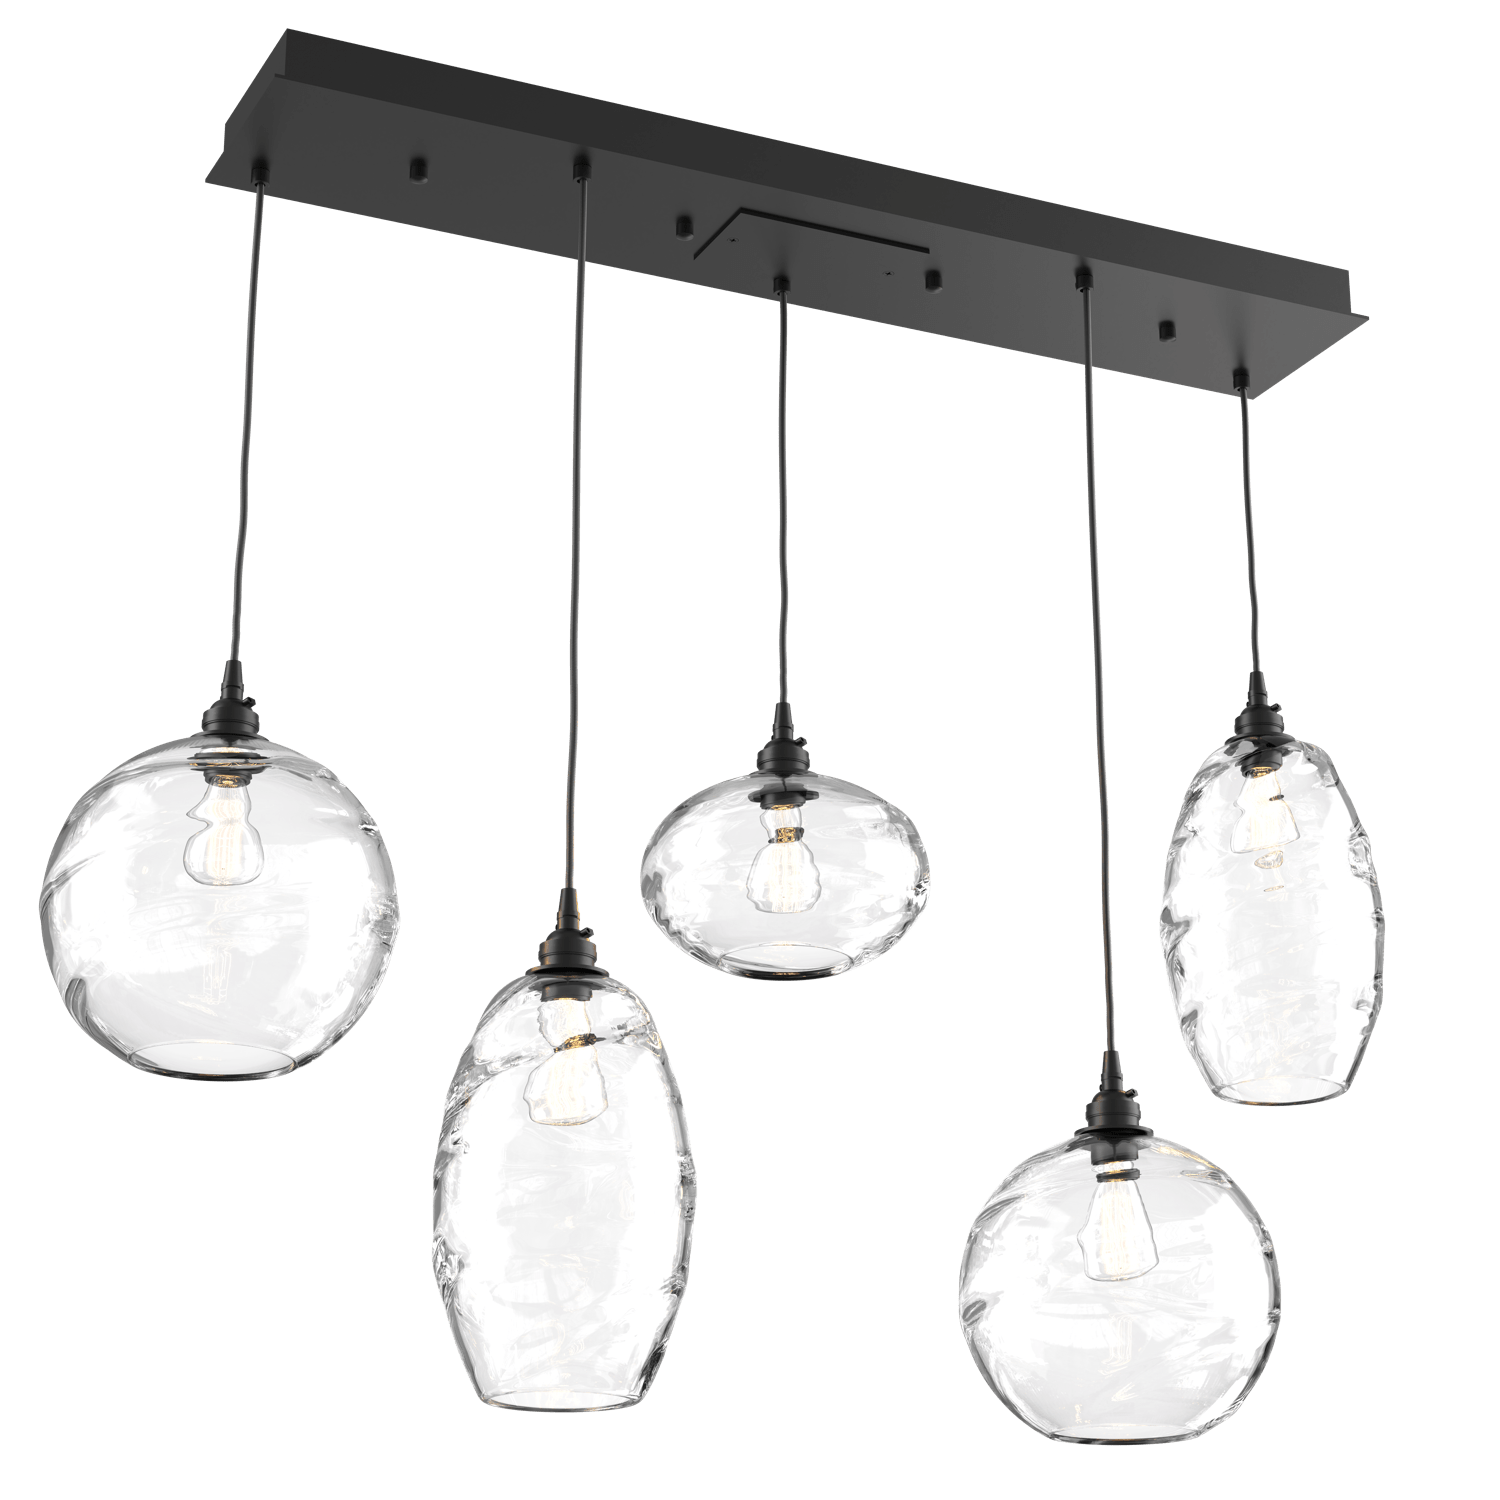 PLB0048-05-MB-OC-Hammerton-Studio-Optic-Blown-Glass-Misto-5-light-linear-pendant-chandelier-with-matte-black-finish-and-optic-clear-blown-glass-shades-and-incandescent-lamping